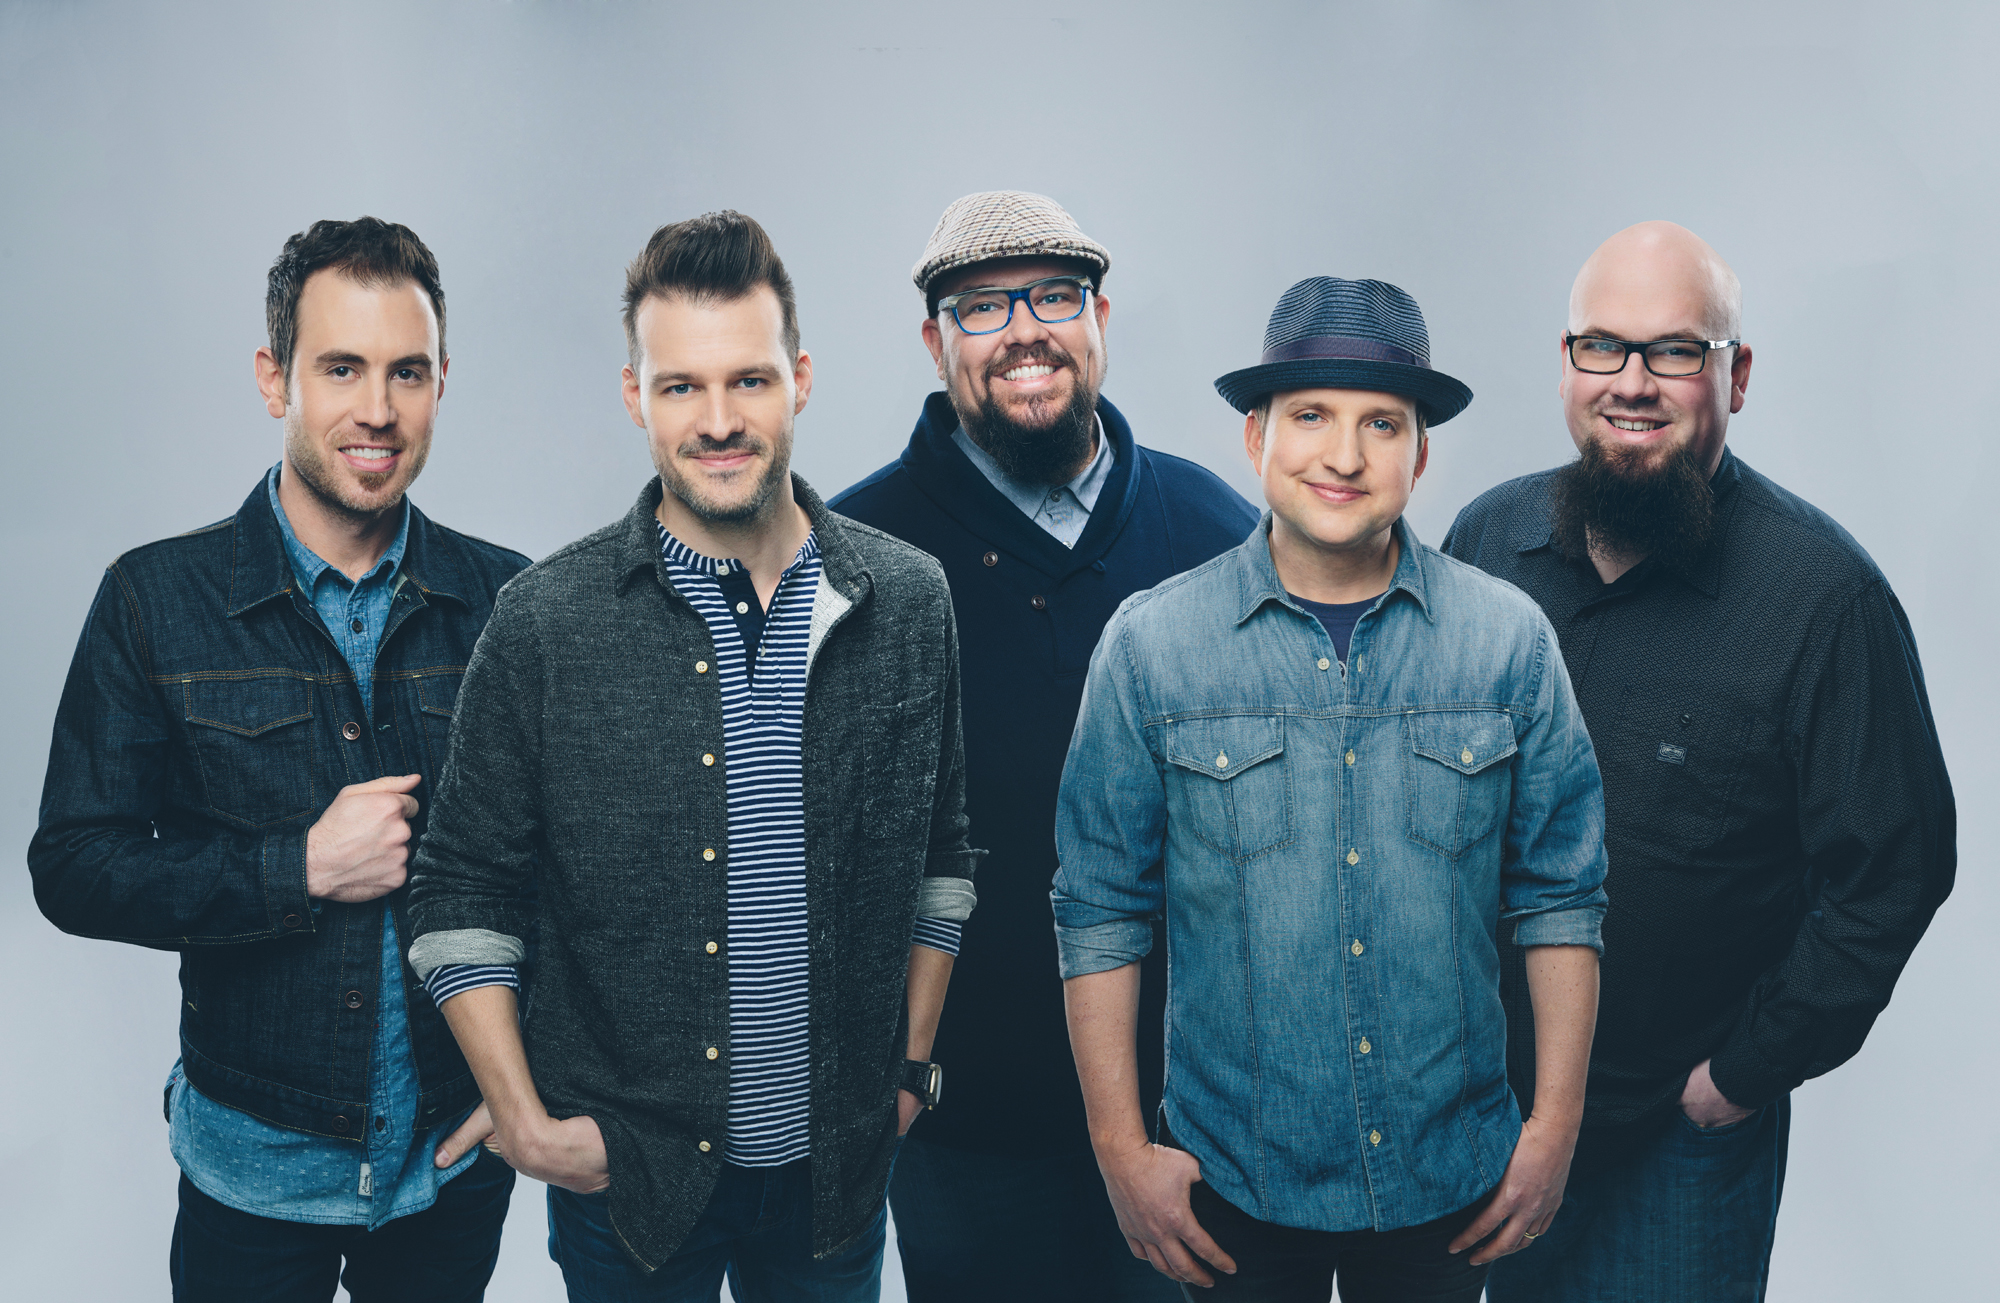 Big Daddy Weave to perform at SMWC - SMWC